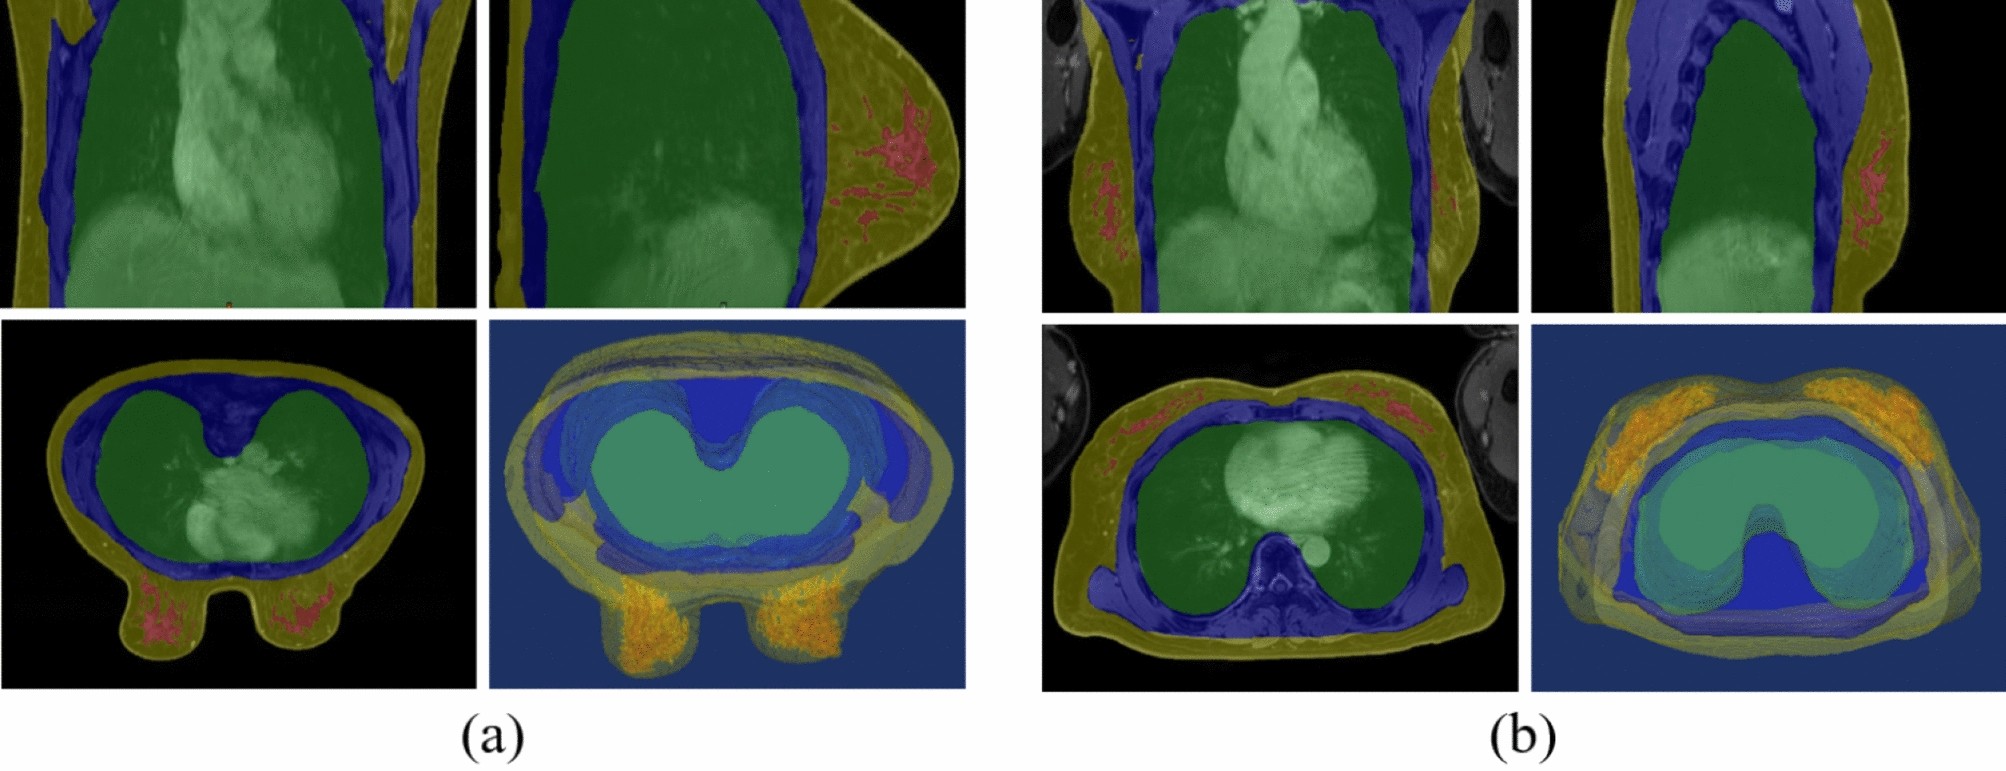 Improvement of semantic segmentation through transfer learning of  multi-class regions with convolutional neural networks on supine and prone  breast MRI images